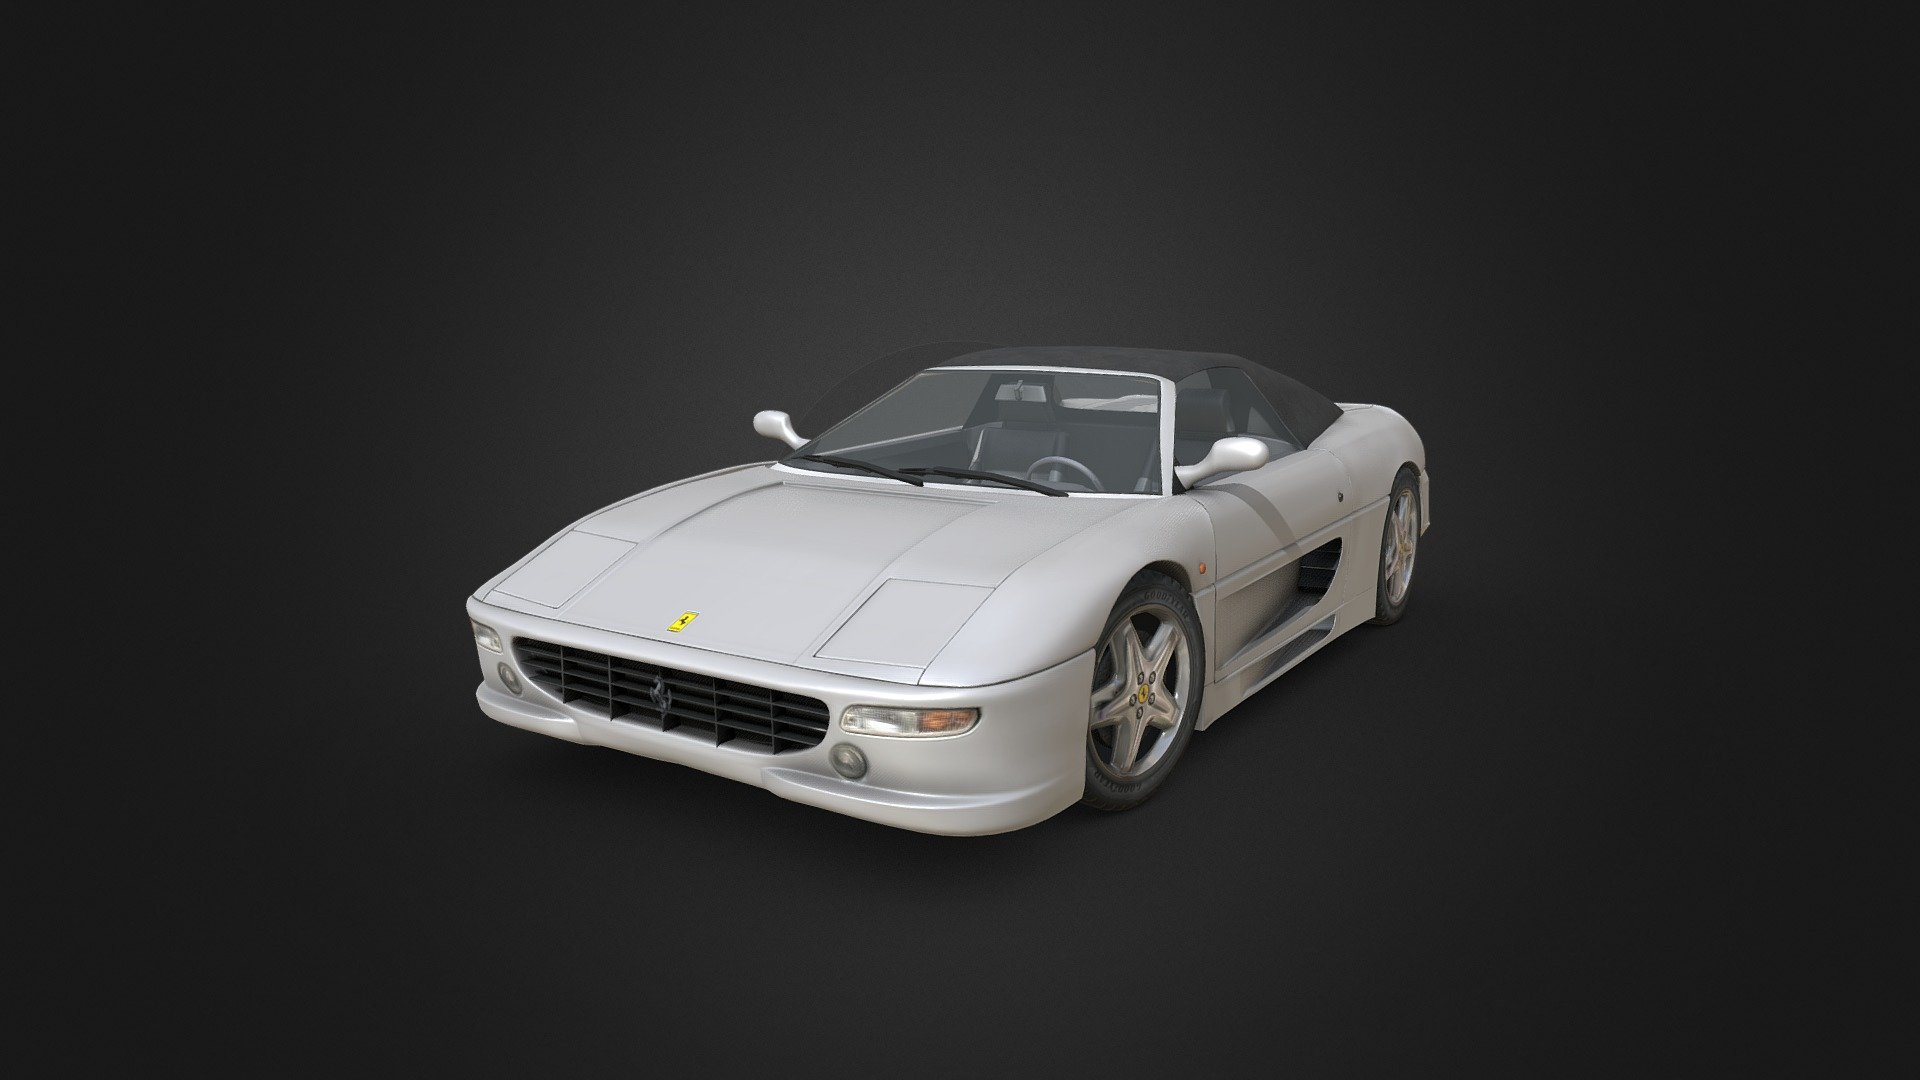 The Ferrari F355 (Type F129) is a sports car manufactured by Italian car manufacturer Ferrari produced from May 1994 to 1999. The car is a heavily revised Ferrari 348 with notable exterior and performance changes. The F355 was succeeded by the all-new Ferrari 360 in 1999.

Design emphasis for the F355 was placed on significantly improved performance, as well as drivability across a wider range of speeds and in different environments (such as low-speed city traffic) 3d model